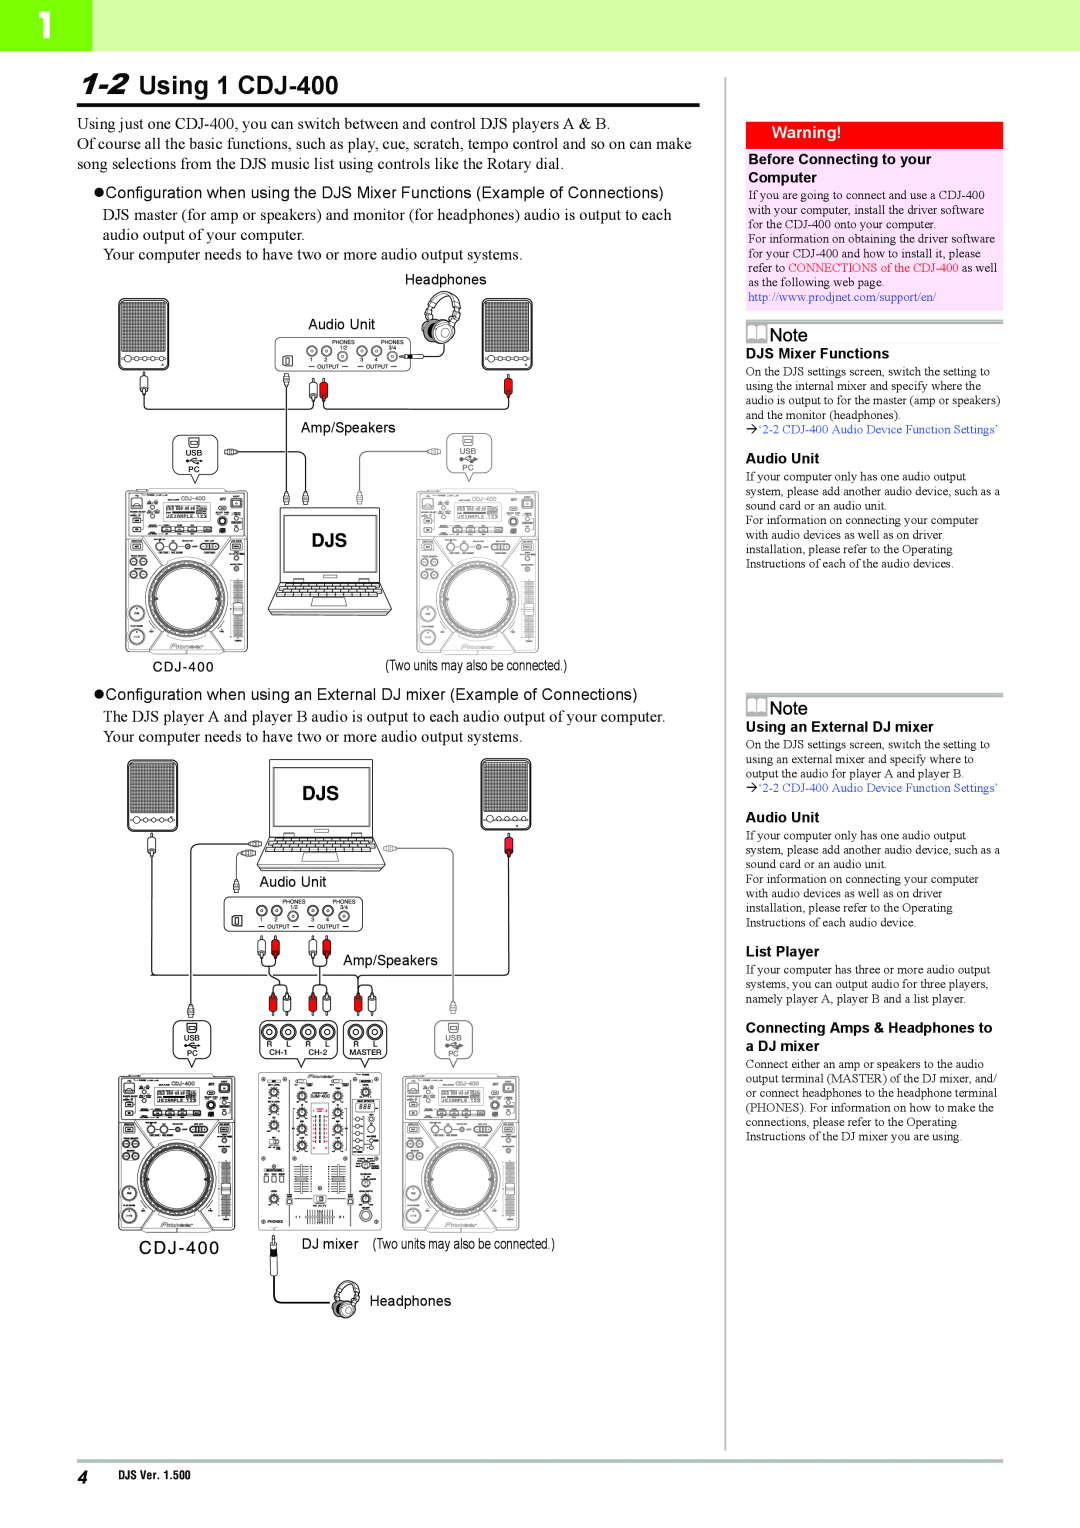 Pioneer manual Using 1 CDJ-400, Before Connecting to your Computer, DJS Mixer Functions, Audio Unit, List Player 